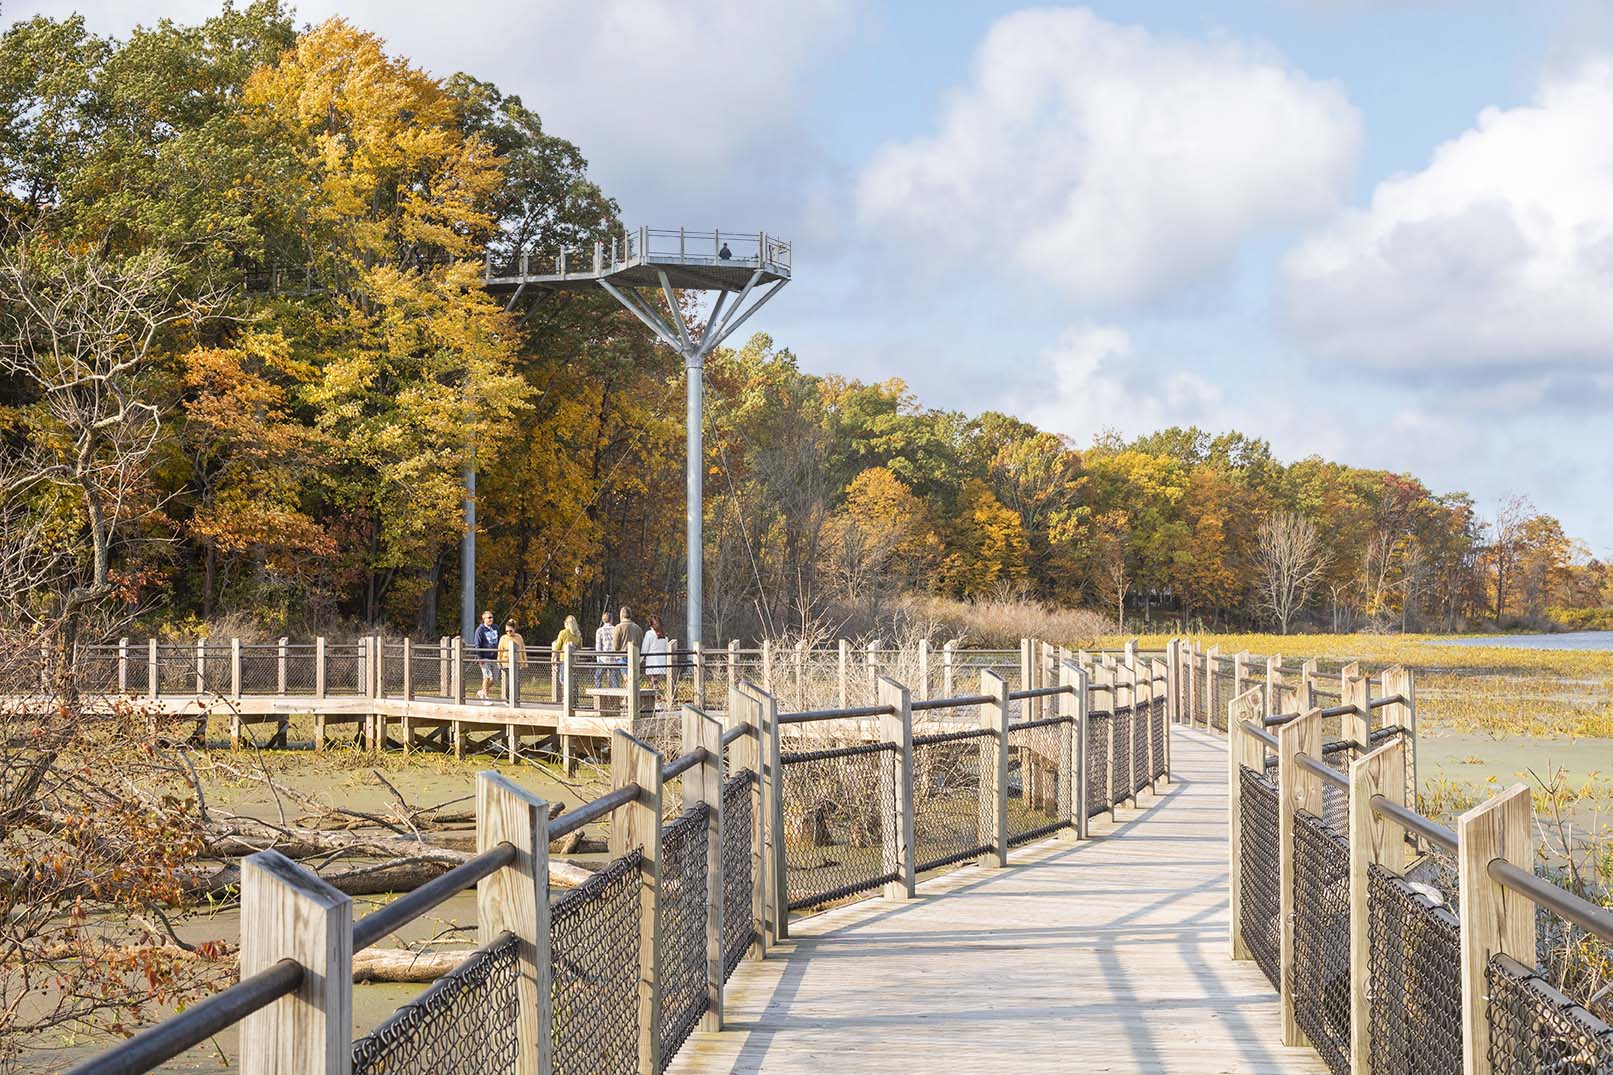 The overlook and walkways at Galien River County Park.